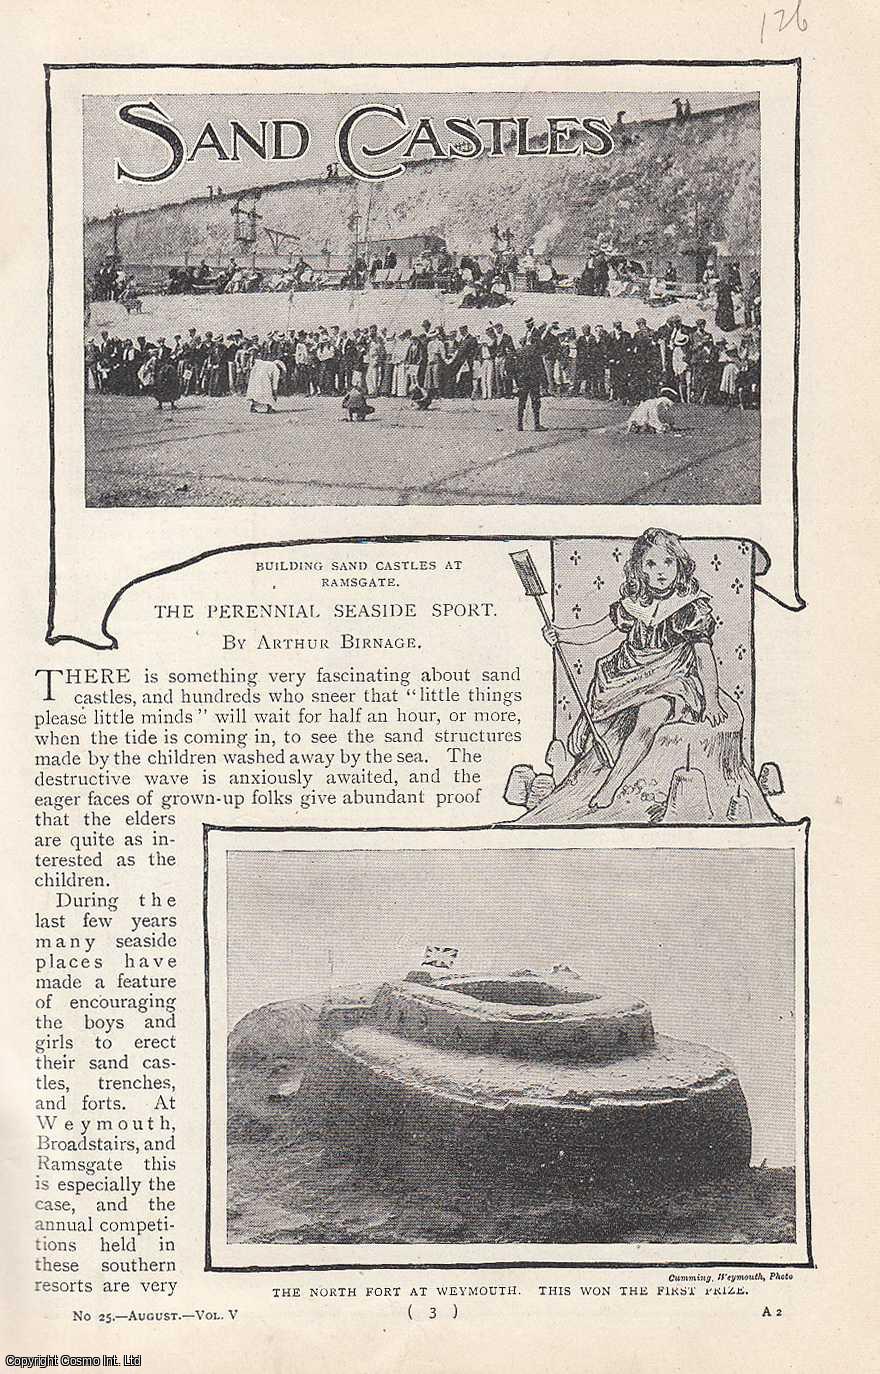 Arthur Birnage - Sand Castles : Building Sand Castles at Ramsgate, The Perennial Seaside Sport. An uncommon original article from the Harmsworth London Magazine, 1901.